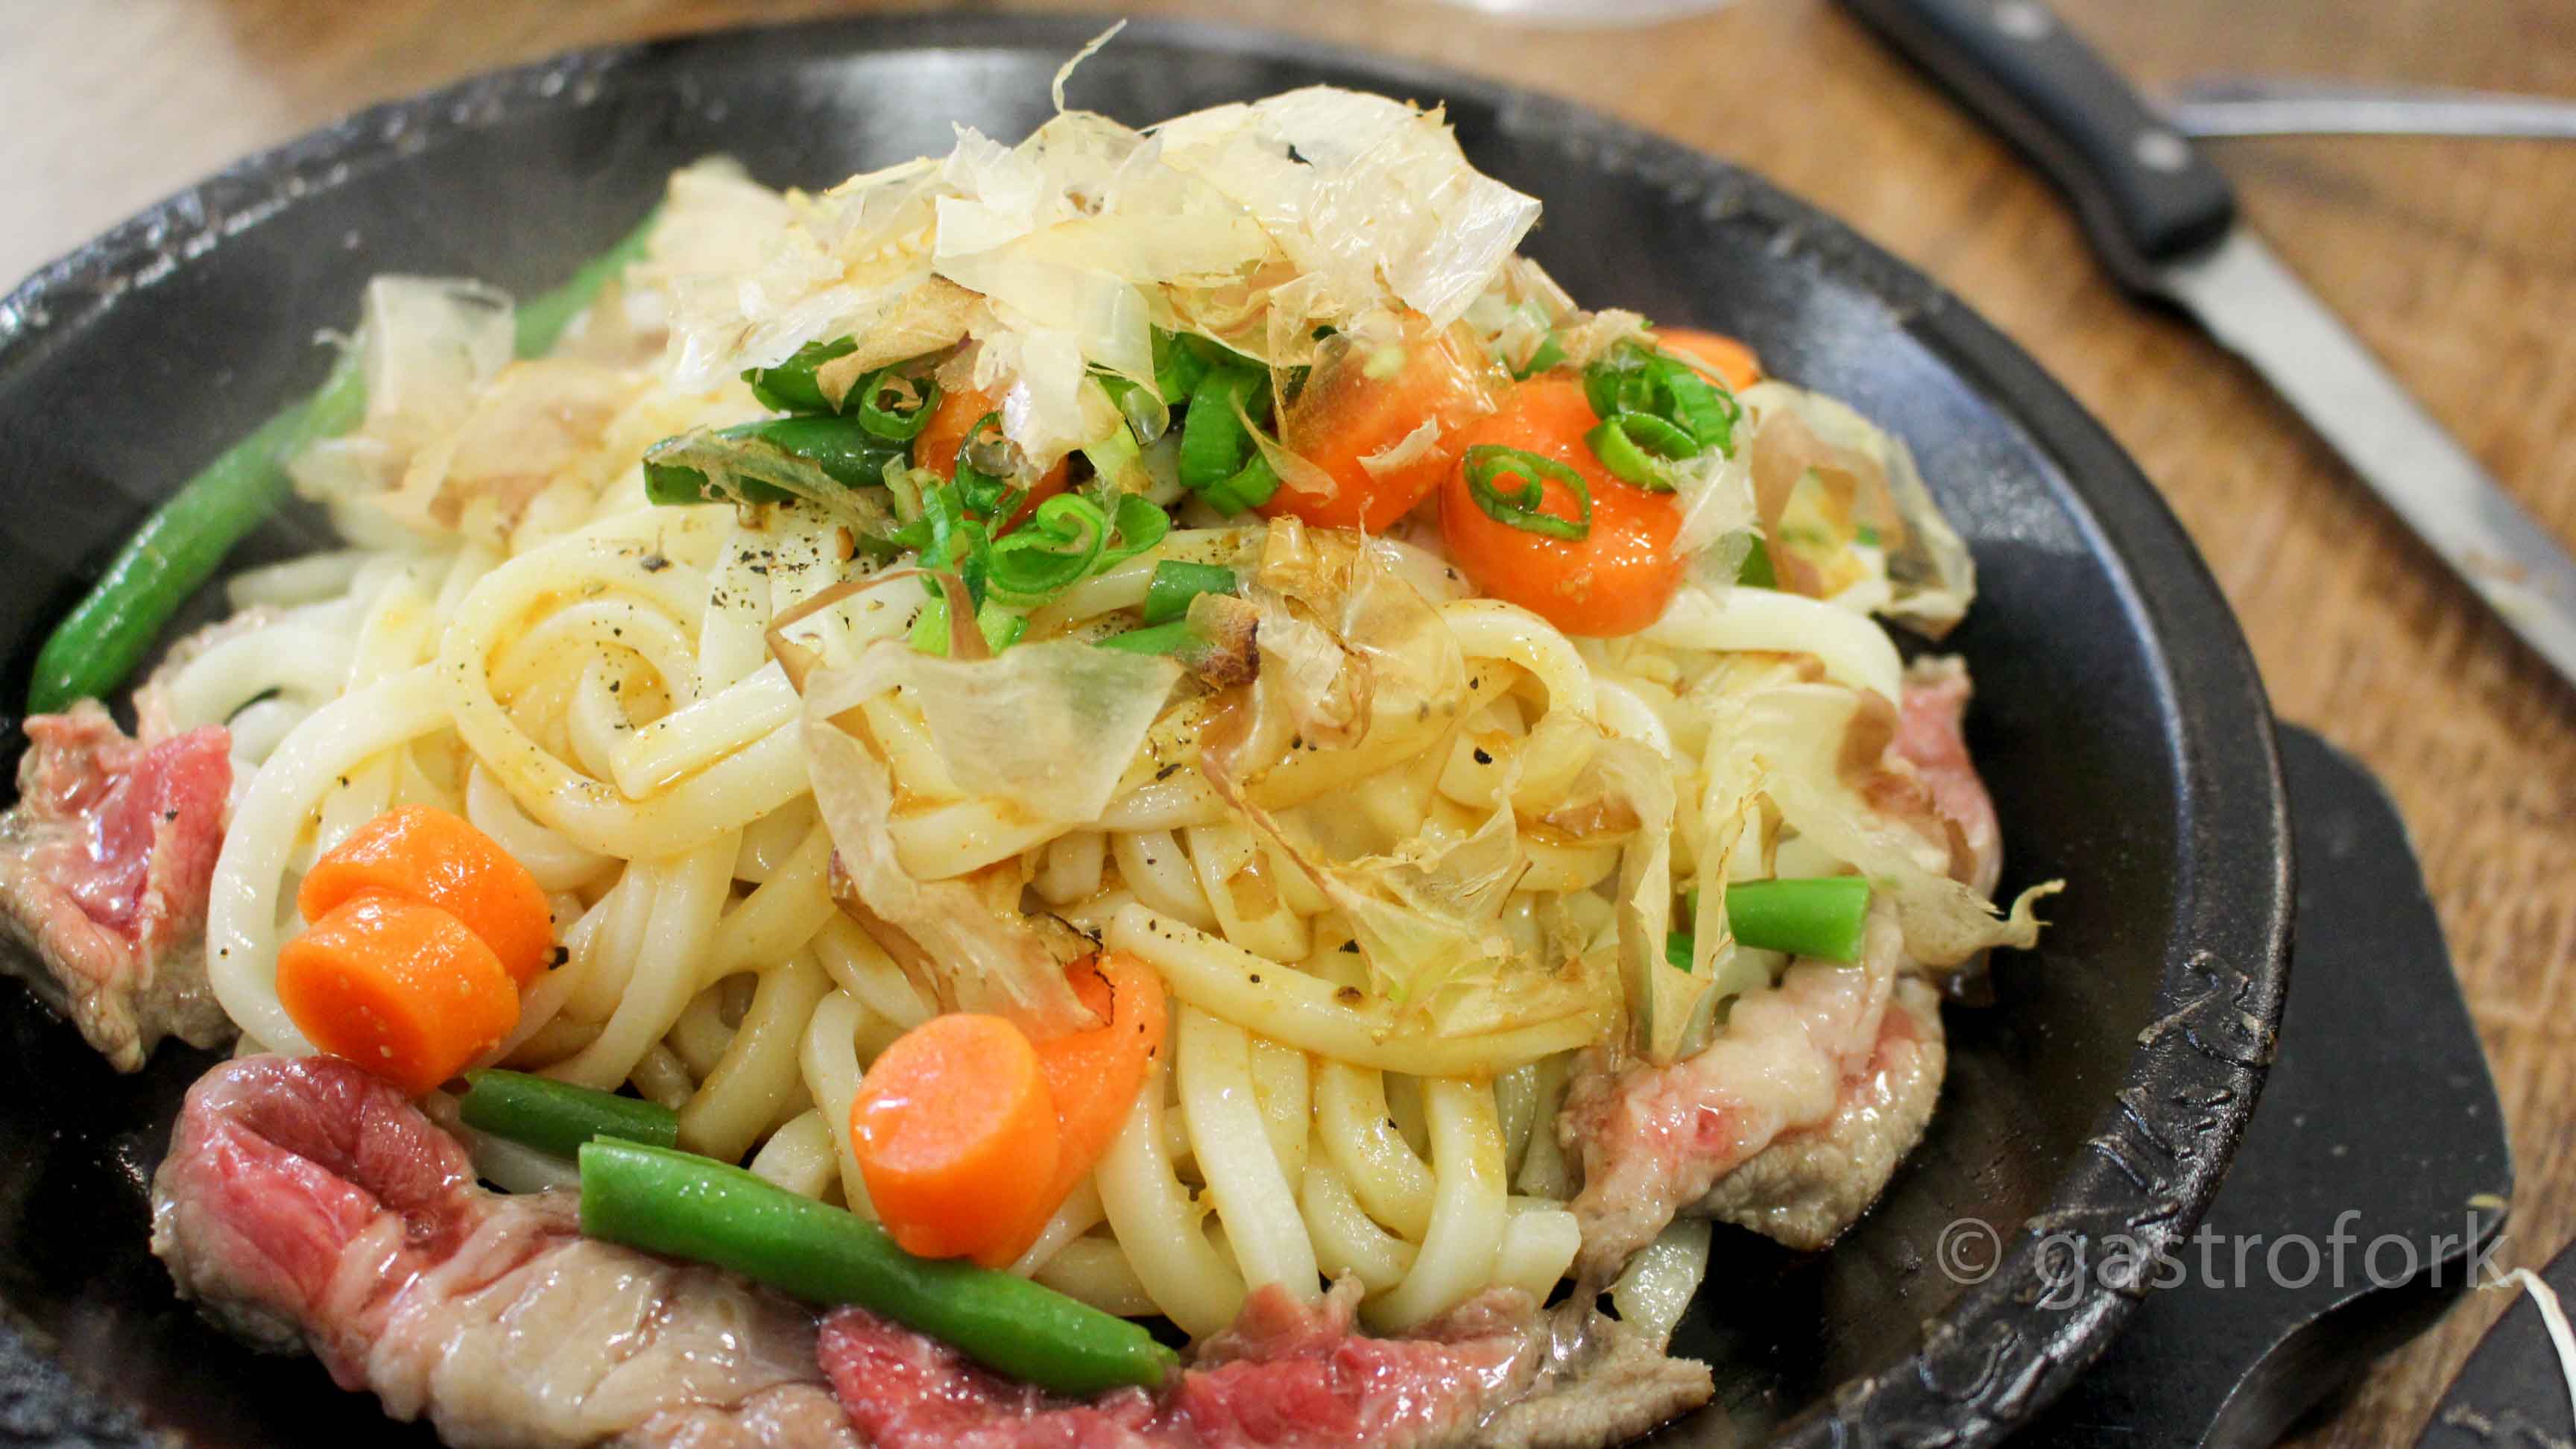 pepper lunch canada dinner specials yaki udon